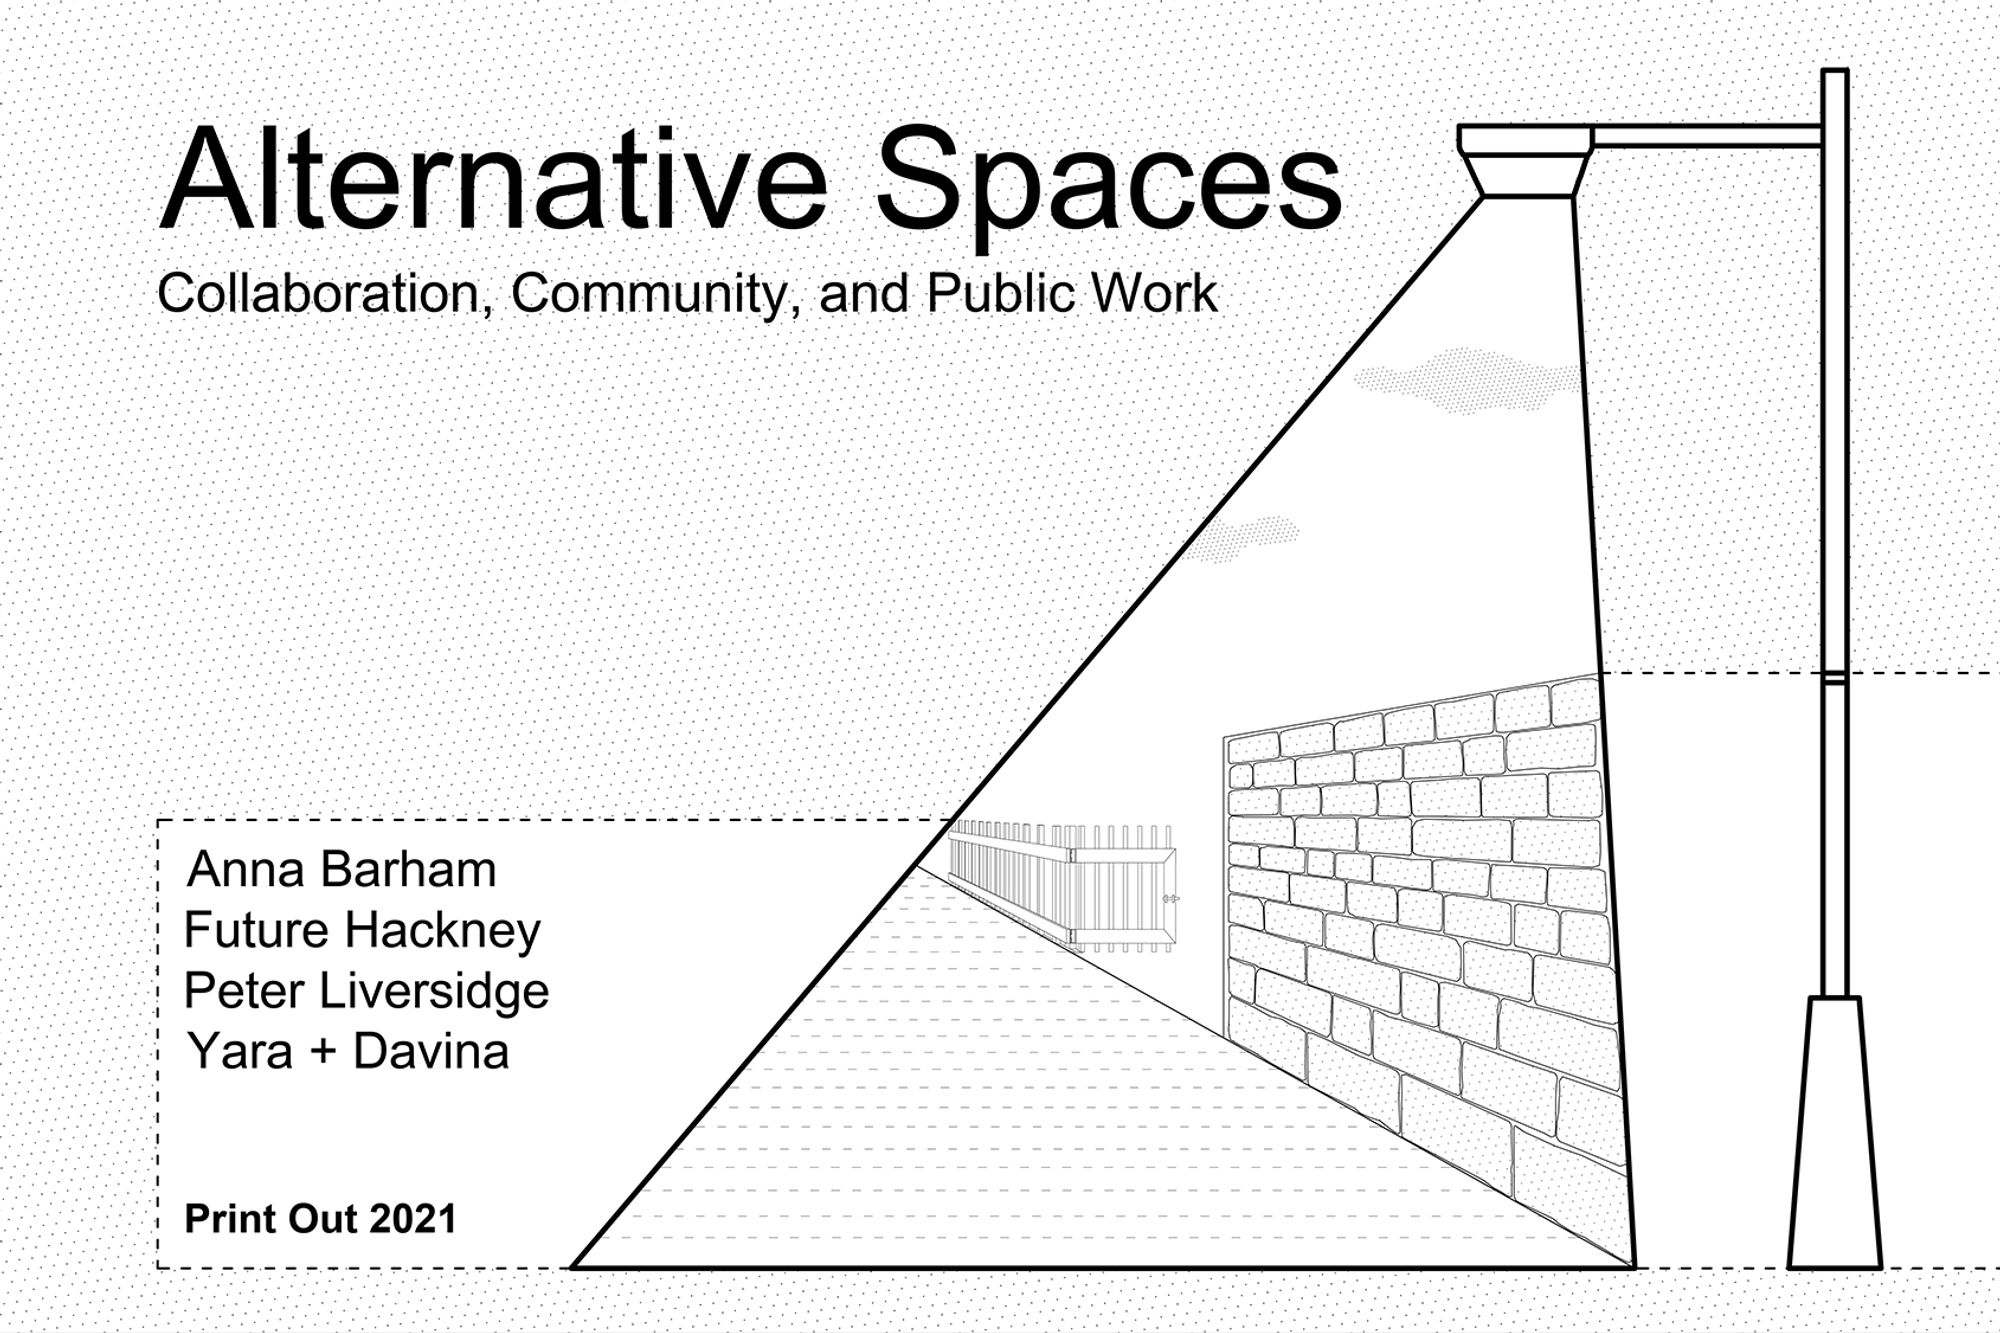 Print Out 2021 // Alternative Spaces: Collaboration, Community, and Public Work-image